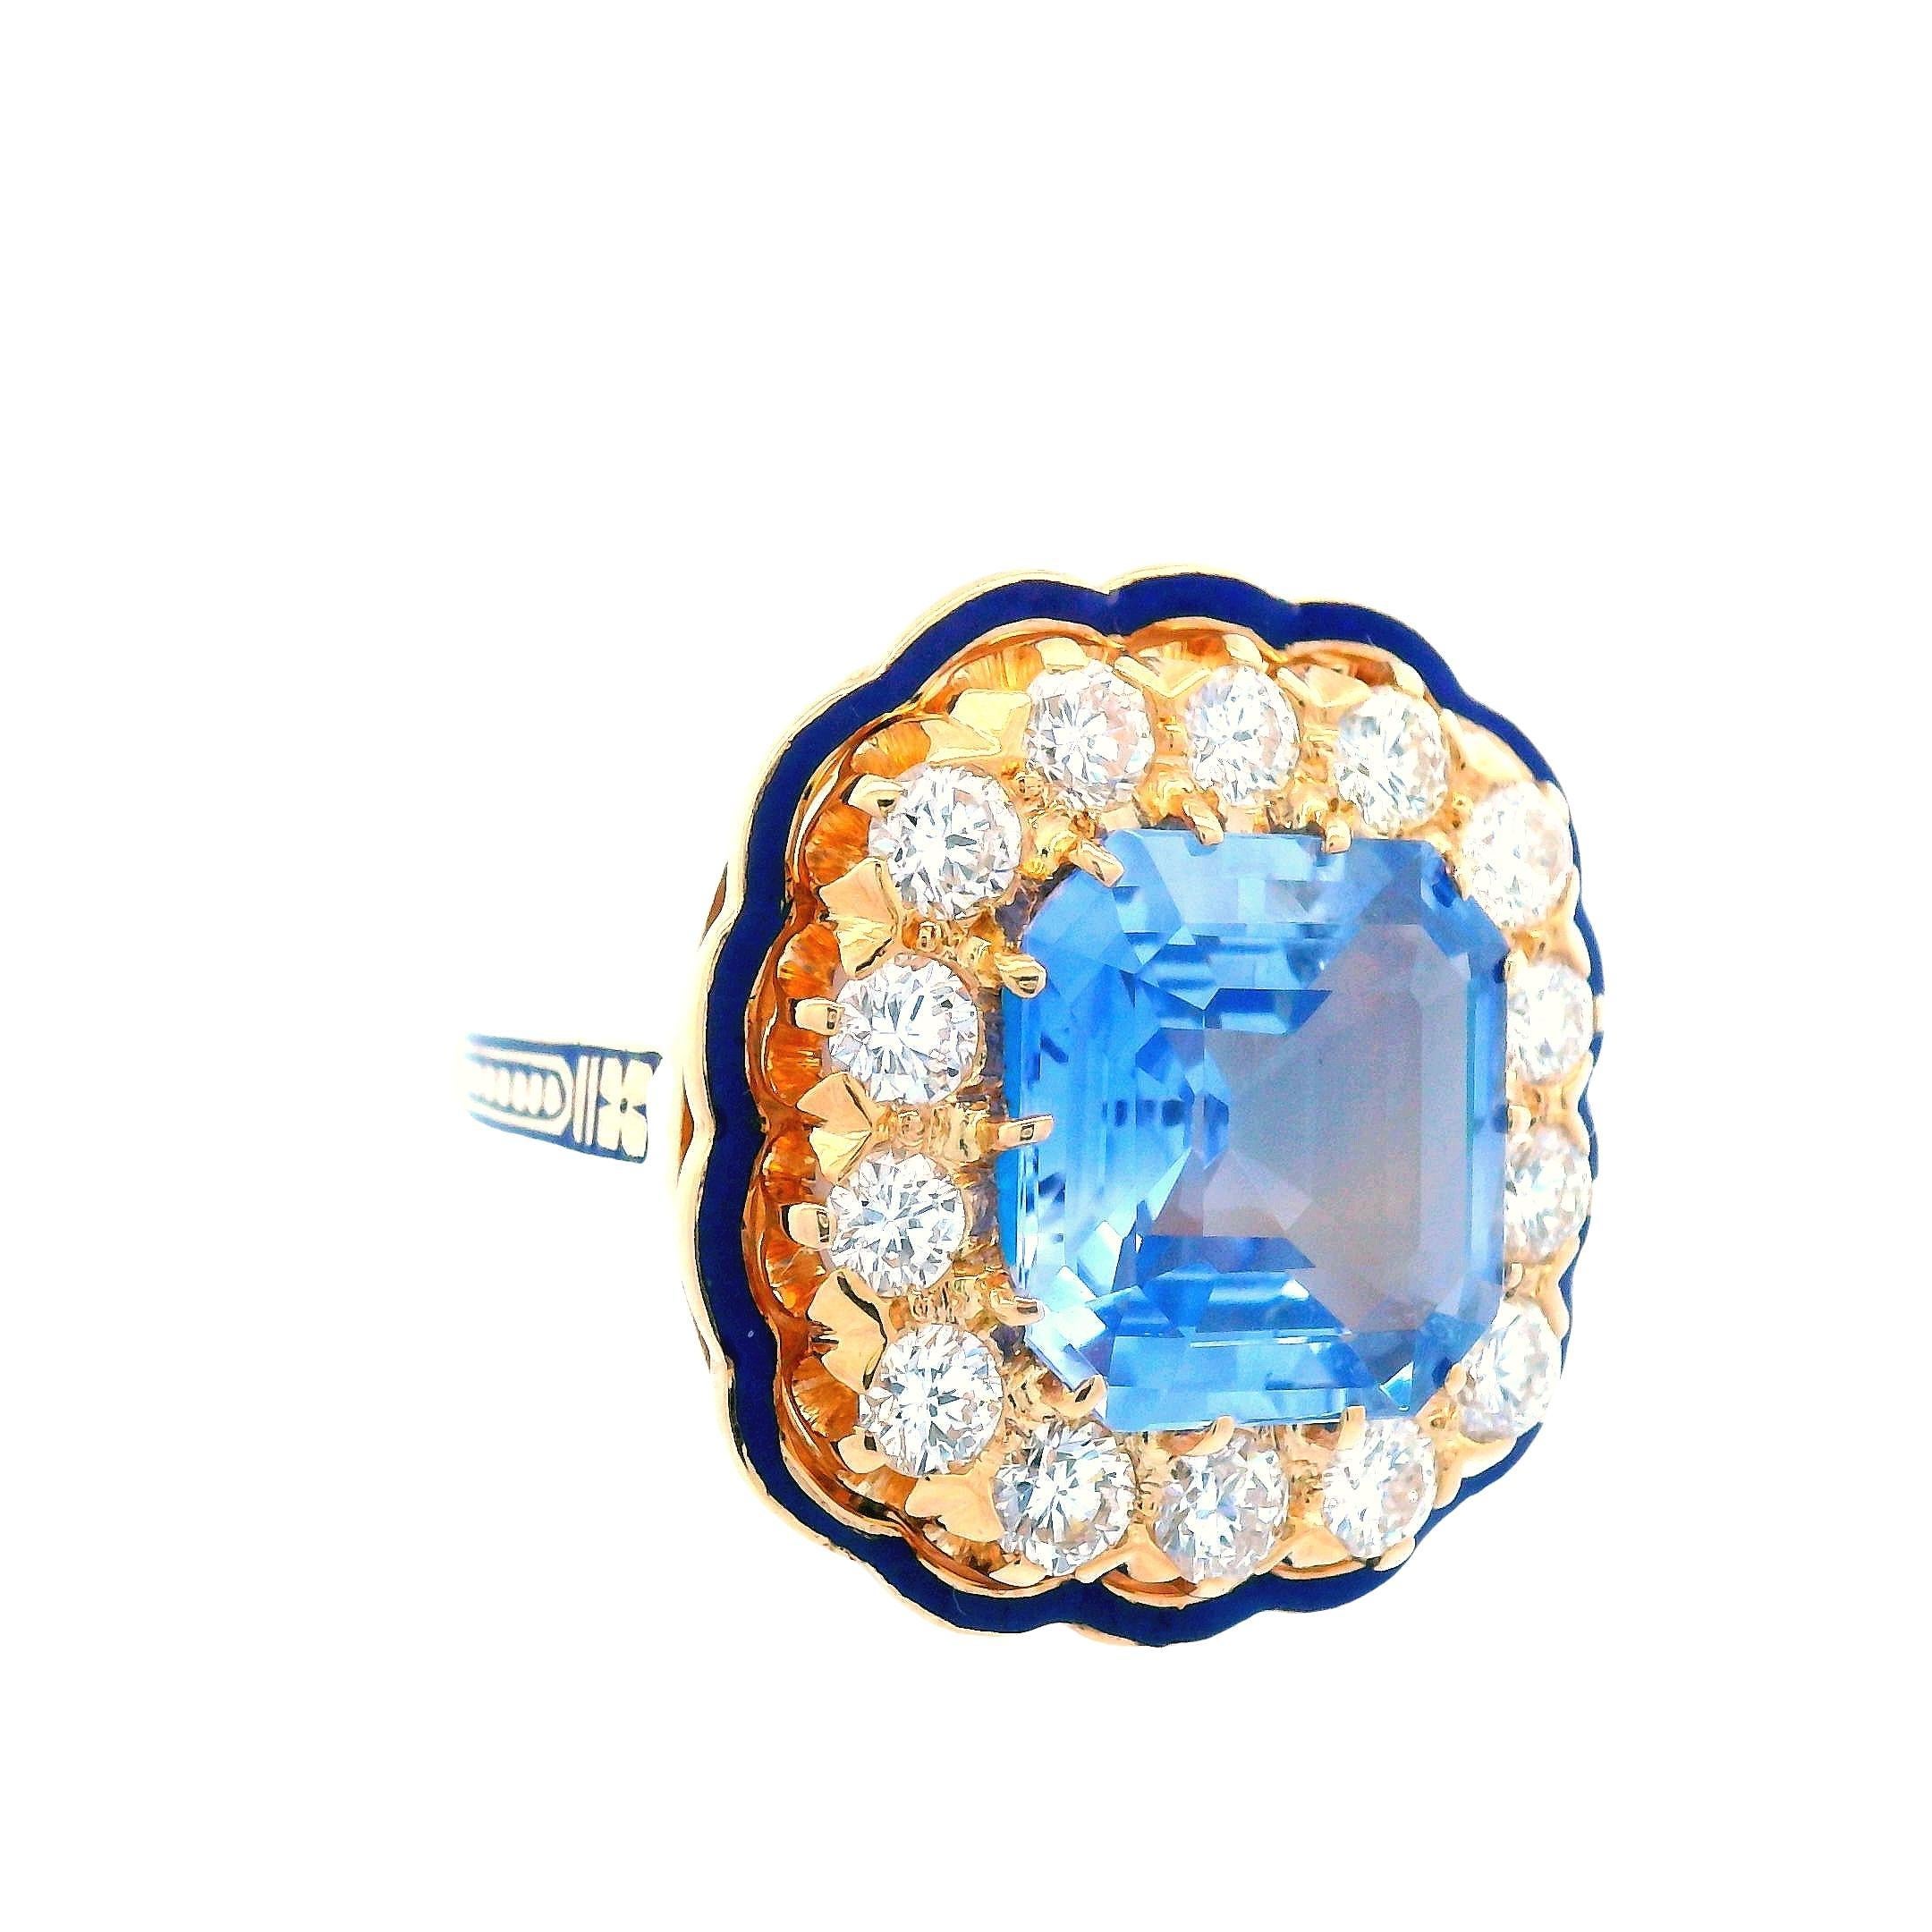 This ring is truly special. This 14k yellow gold ring contains a 6+ carats of square cushion NO HEAT Ceylon sapphire as well as 1.75 carats of diamond! This heavy hitter of a ring is guaranteed to stand out amongst the best of the best. Being made